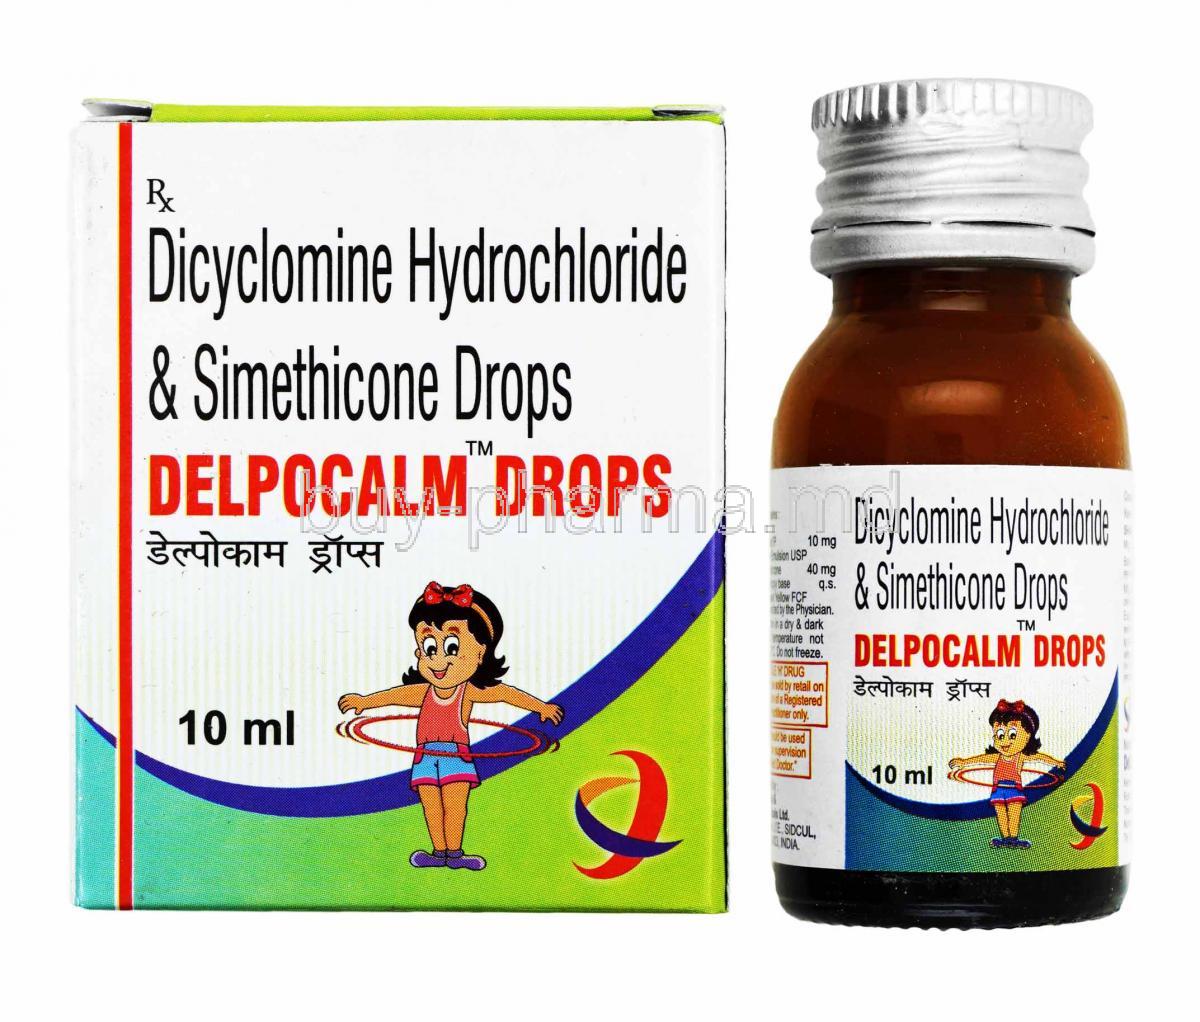 Delpocalm drops, Dicyclomine and Simethicone box and bottle